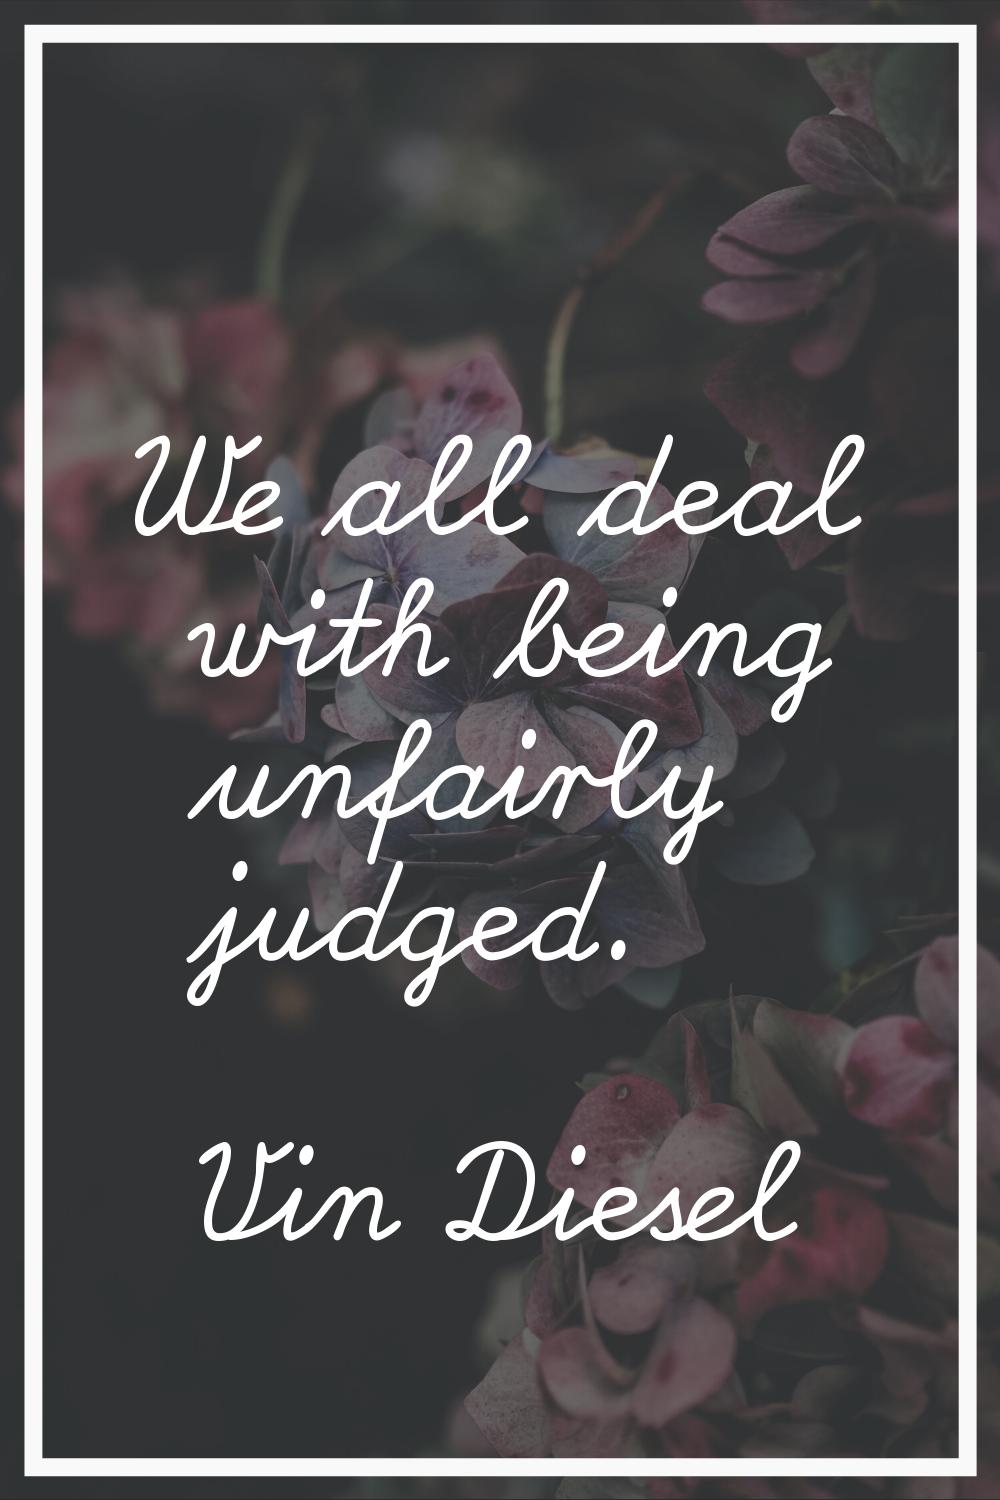 We all deal with being unfairly judged.